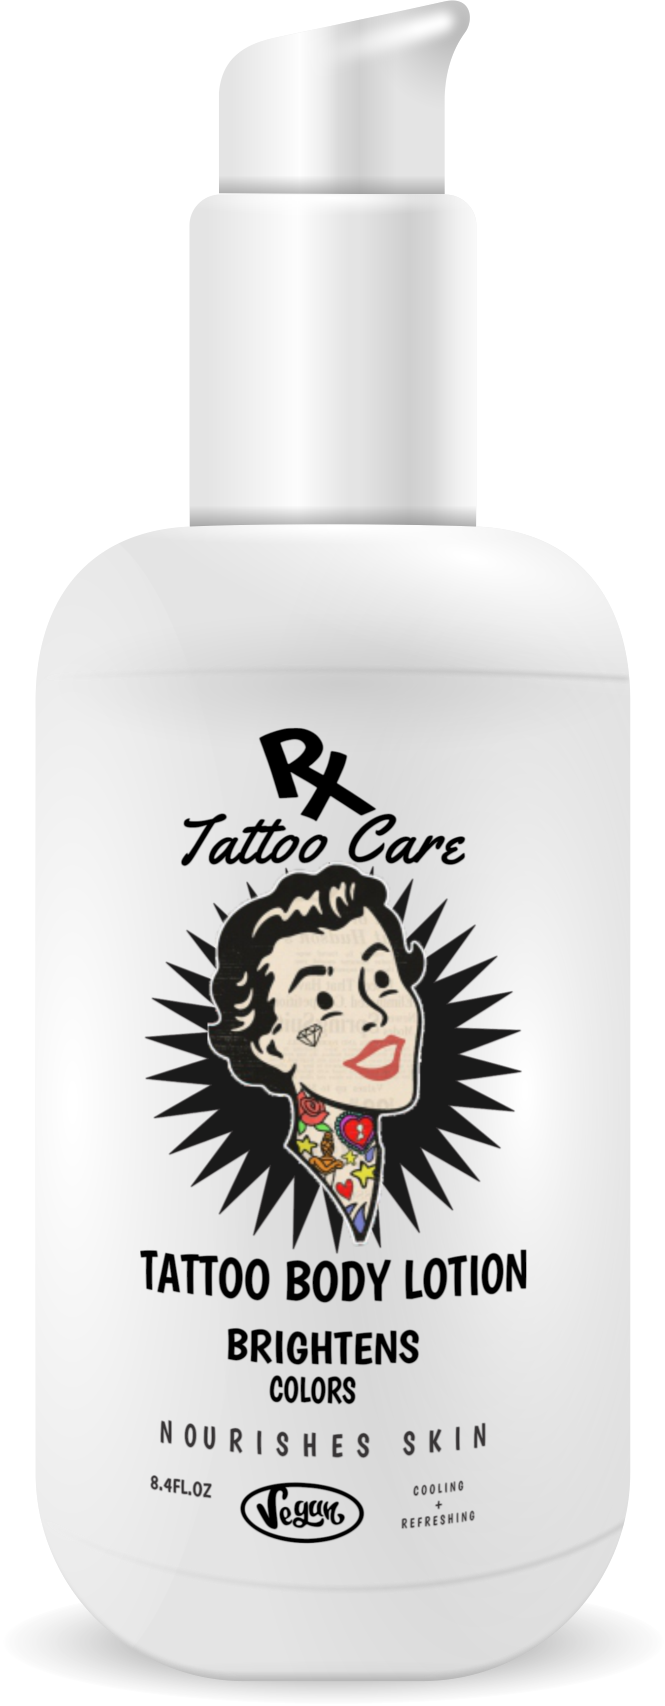 Buy Pain-Free Tattoo Numbing Cream Online | Tattoo Artist Recommended –  Pure Numb Tattoo Numbing